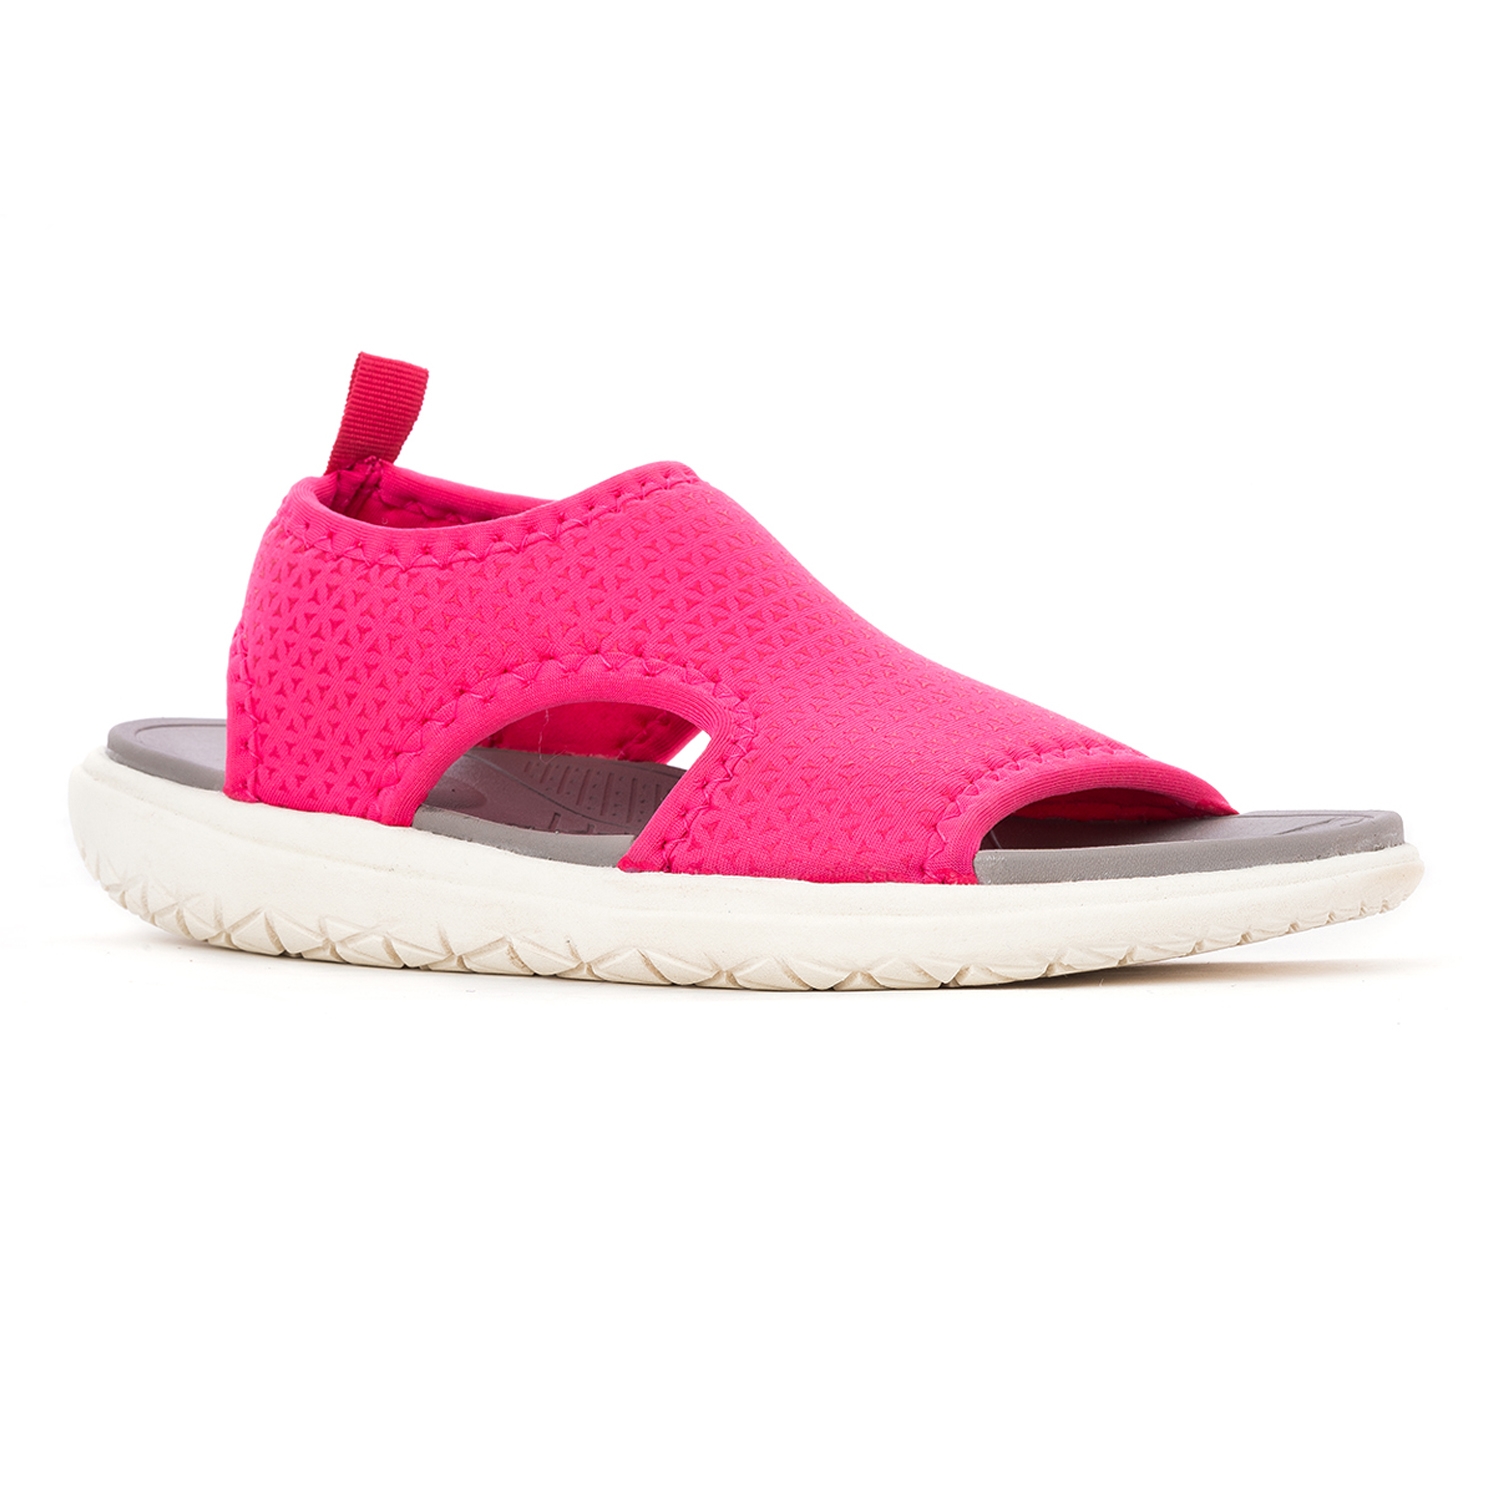 Khadim | Khadim's Pink Colour Floaters / Sandals having Textile Upper Material - Daily Wear Use for Women ( Size : 3 )